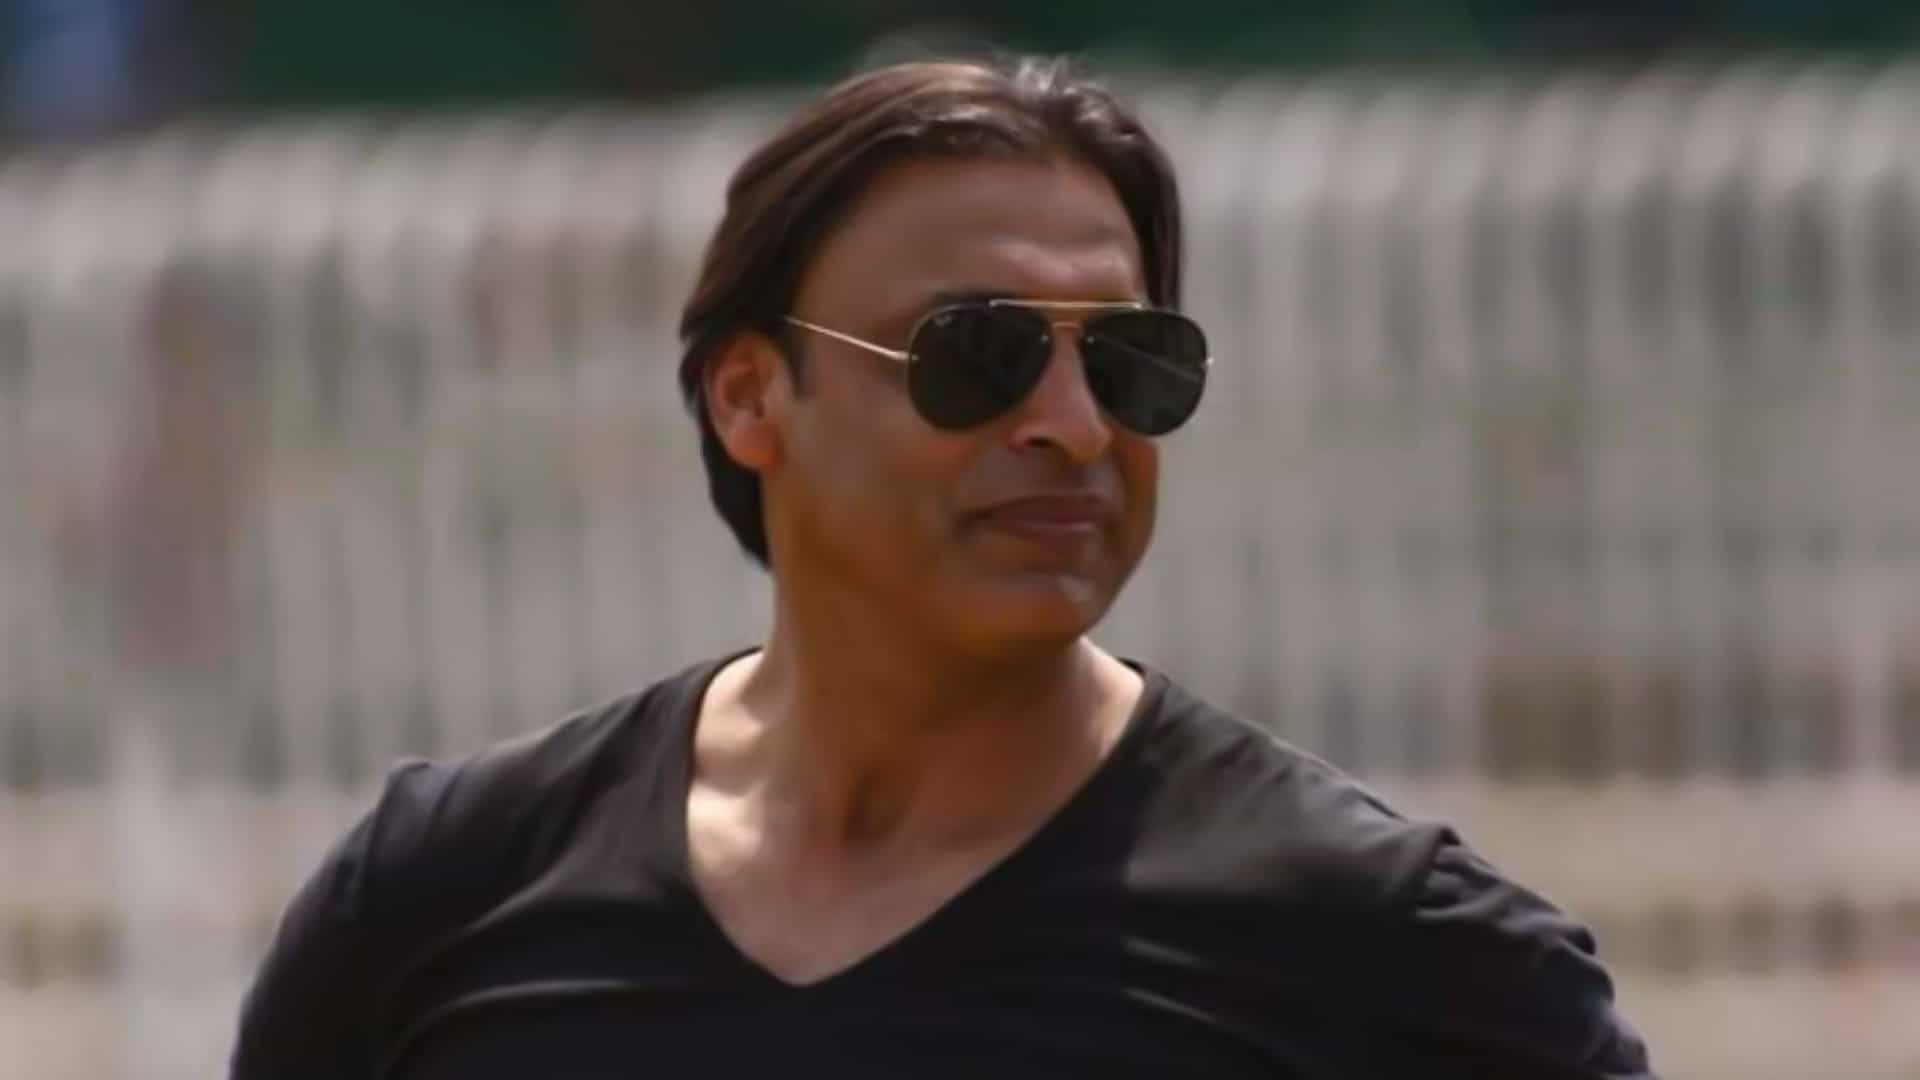 Shoaib Akhtar opens up about turning down Pakistan captaincy
